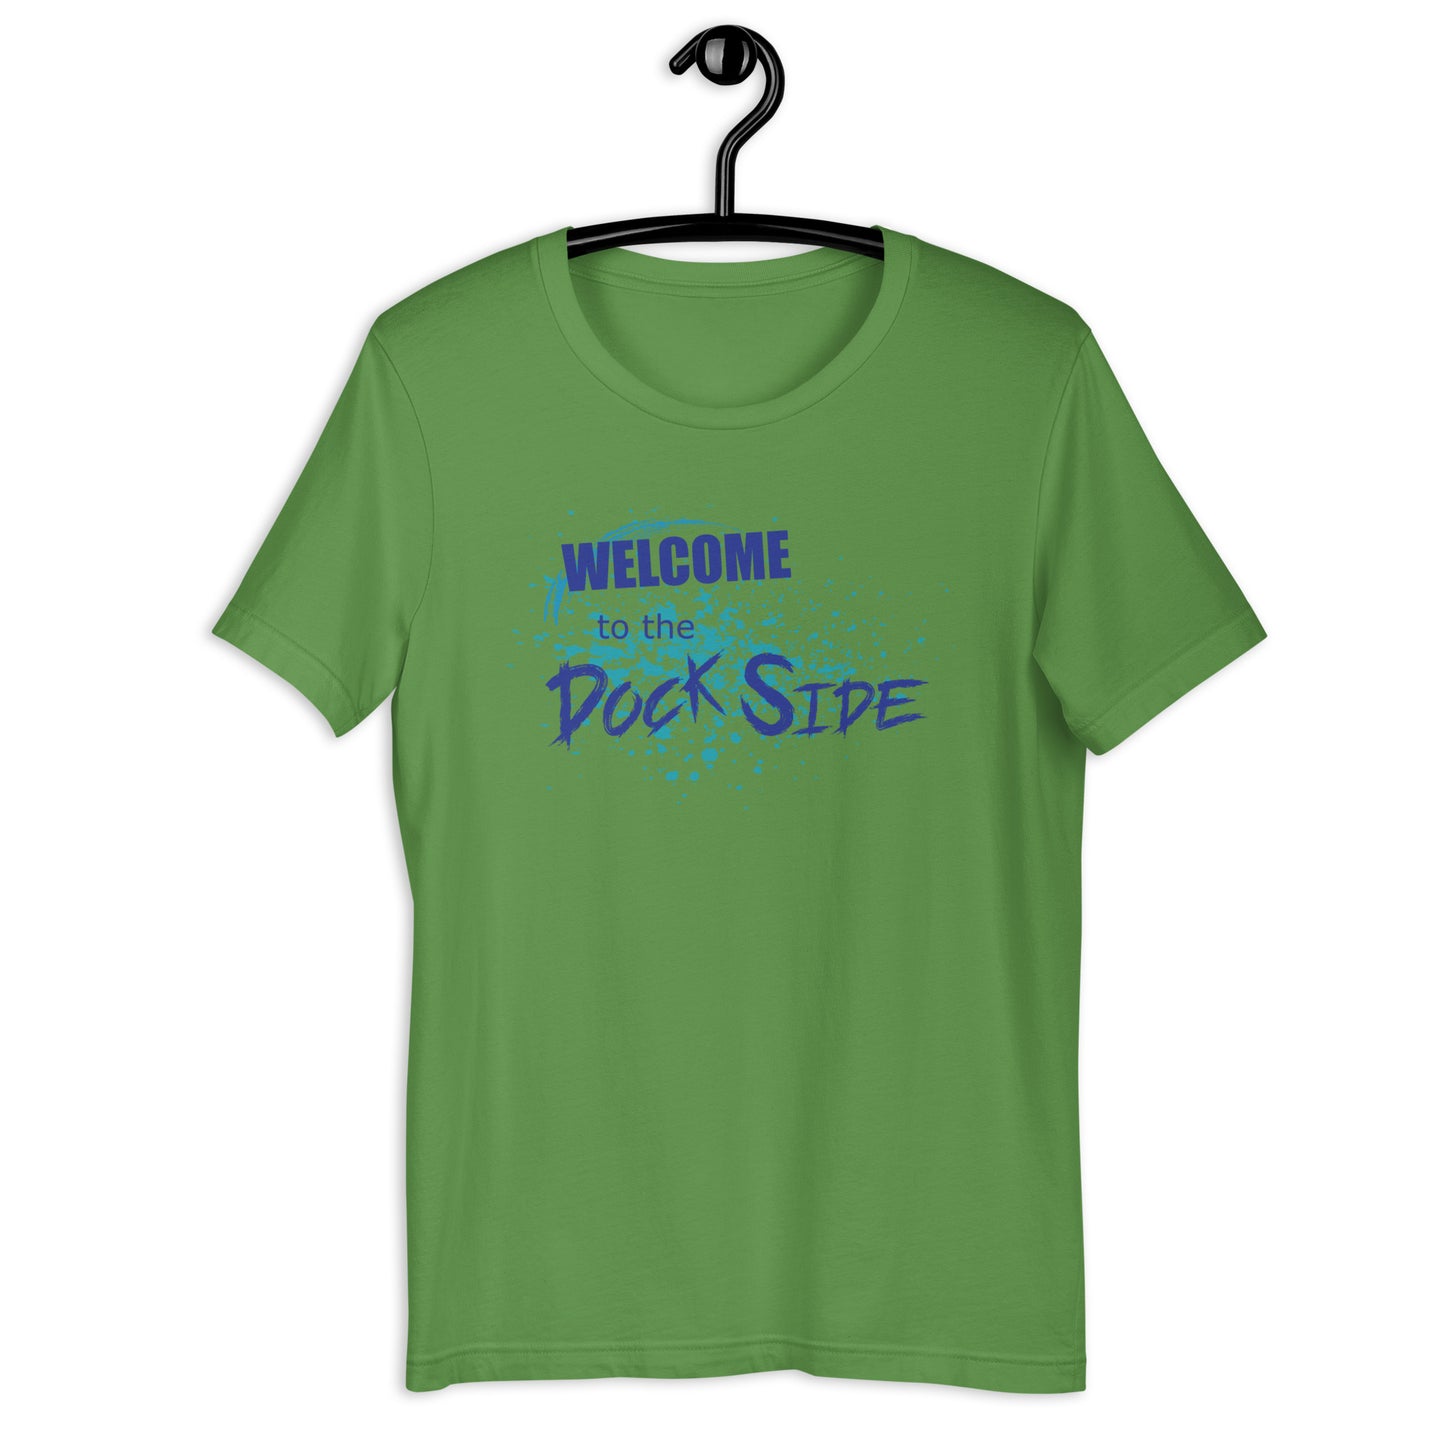 WELCOME TO THE DOCK SIDE - Unisex t-shirt